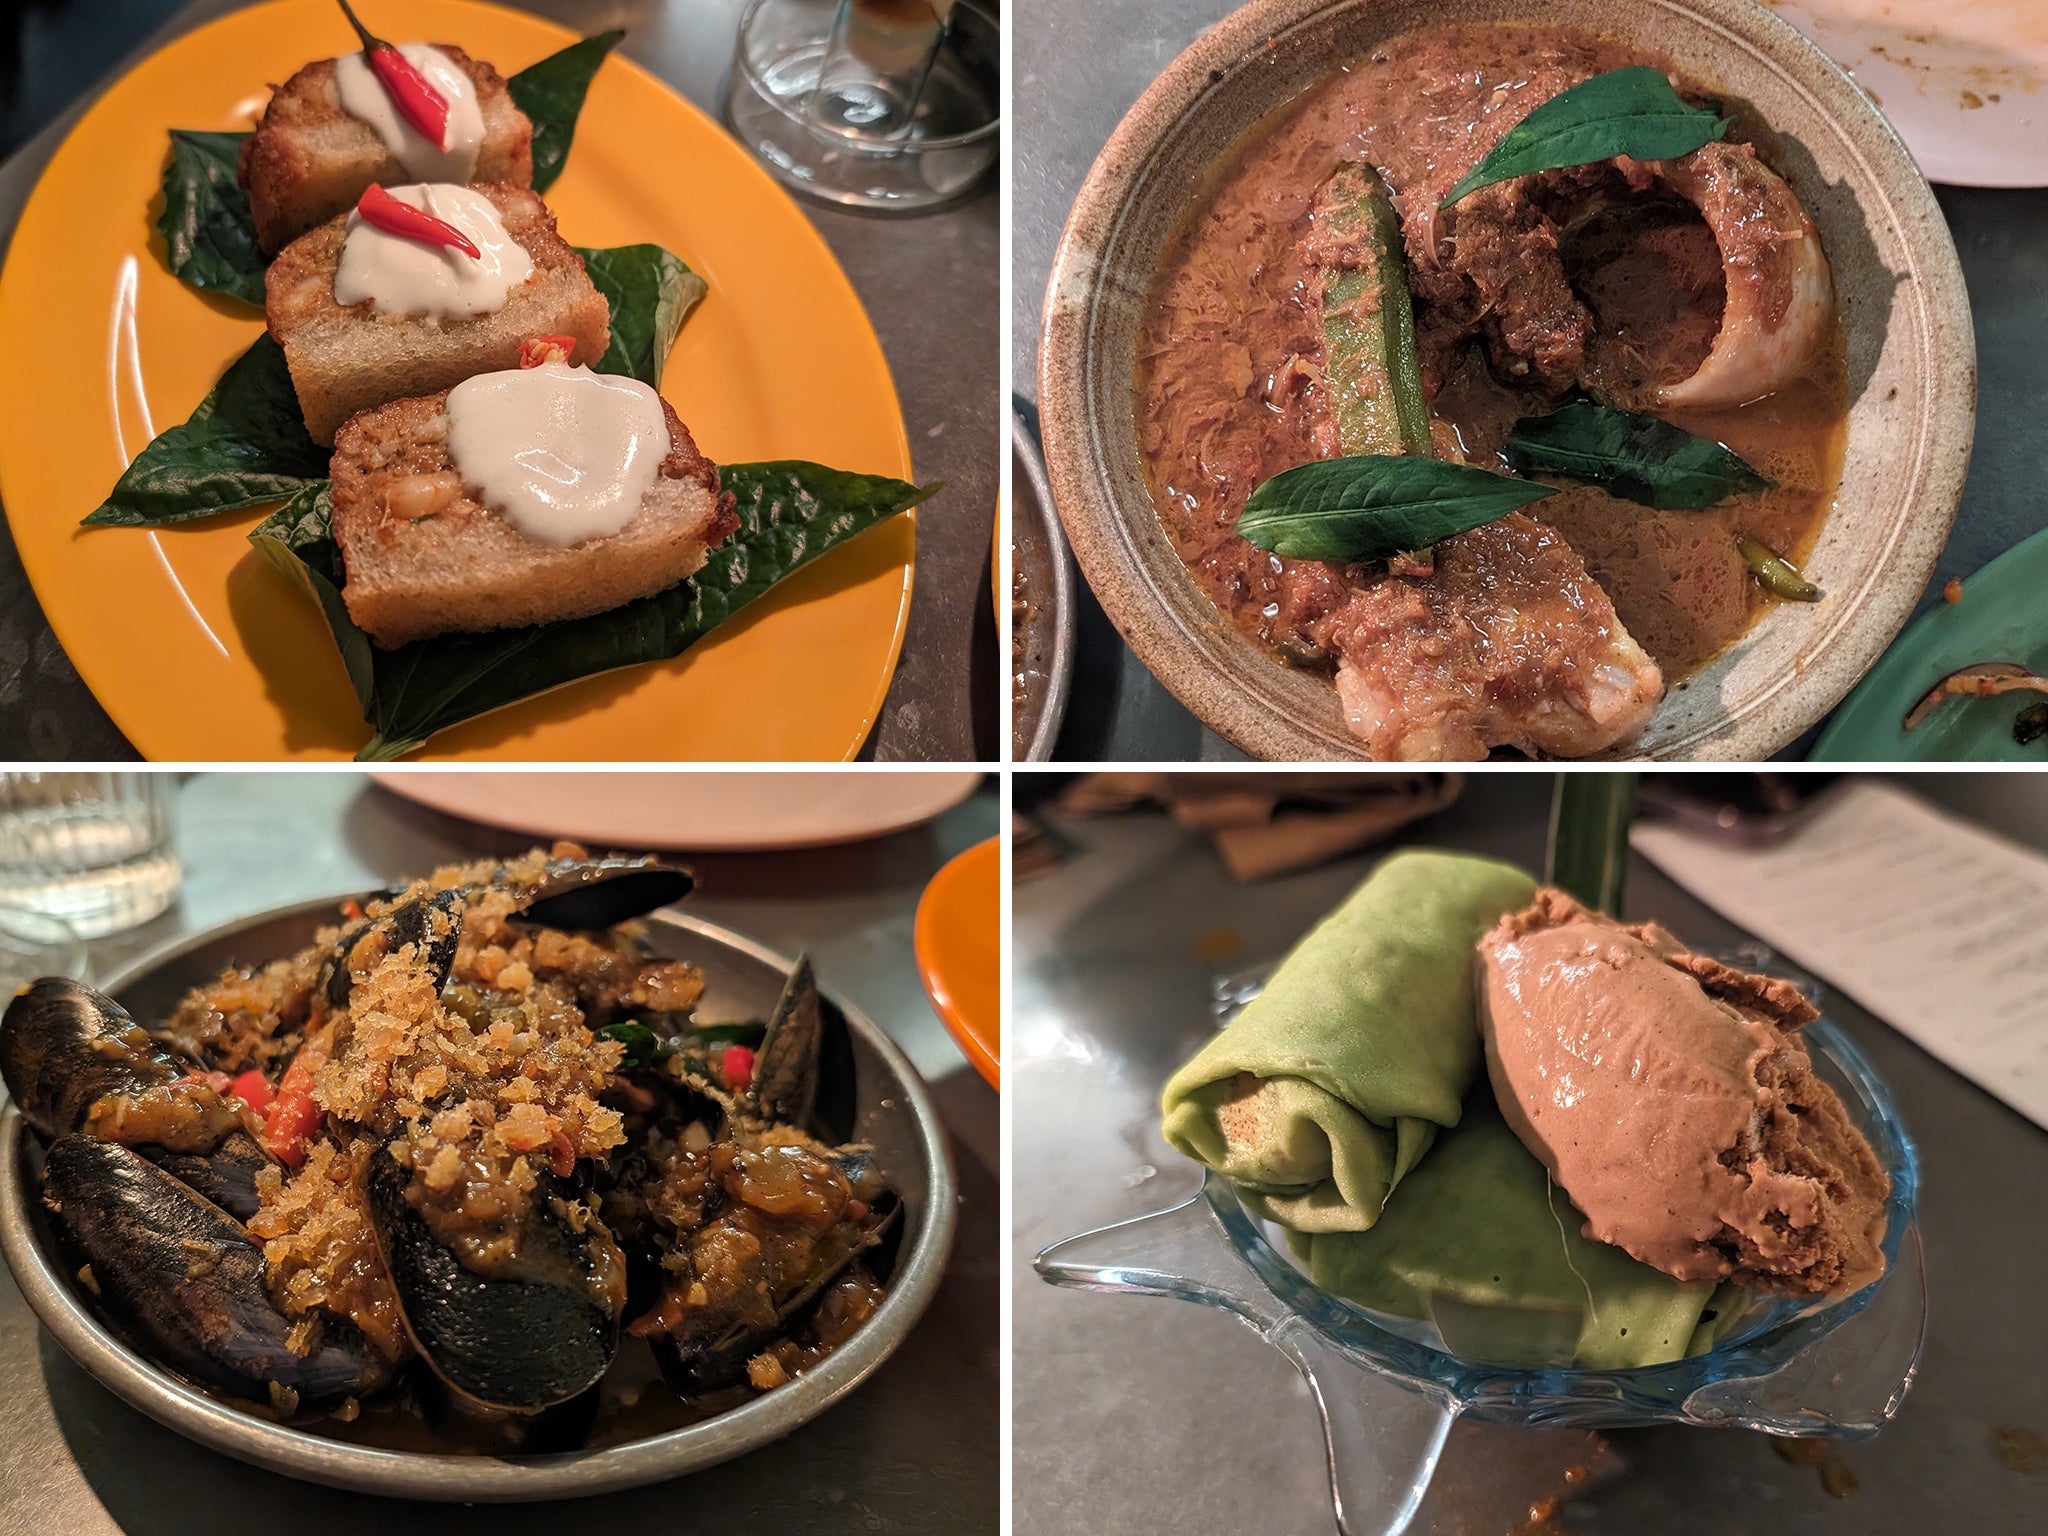 From otak otak to pandan crepes, Mambow is a masterclass in powerhouse Malaysian flavours